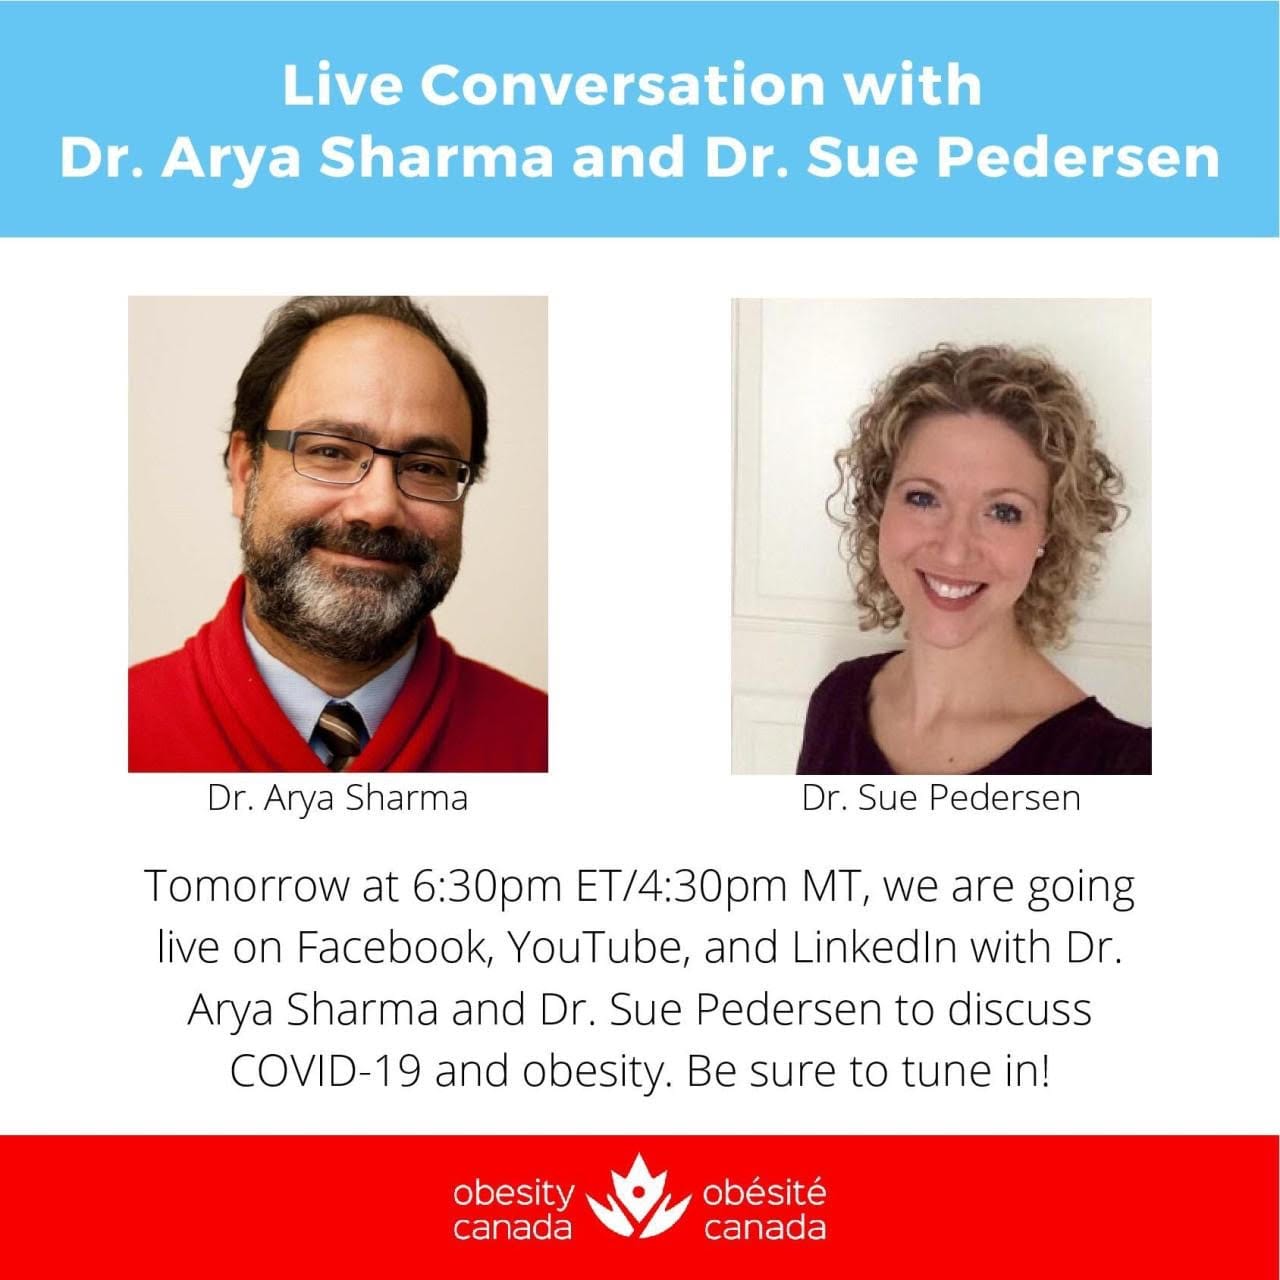 Promotional image for a live discussion with dr. arya sharma and dr. sue pedersen on obesity and covid-19, set to stream on facebook, youtube, and linkedin.